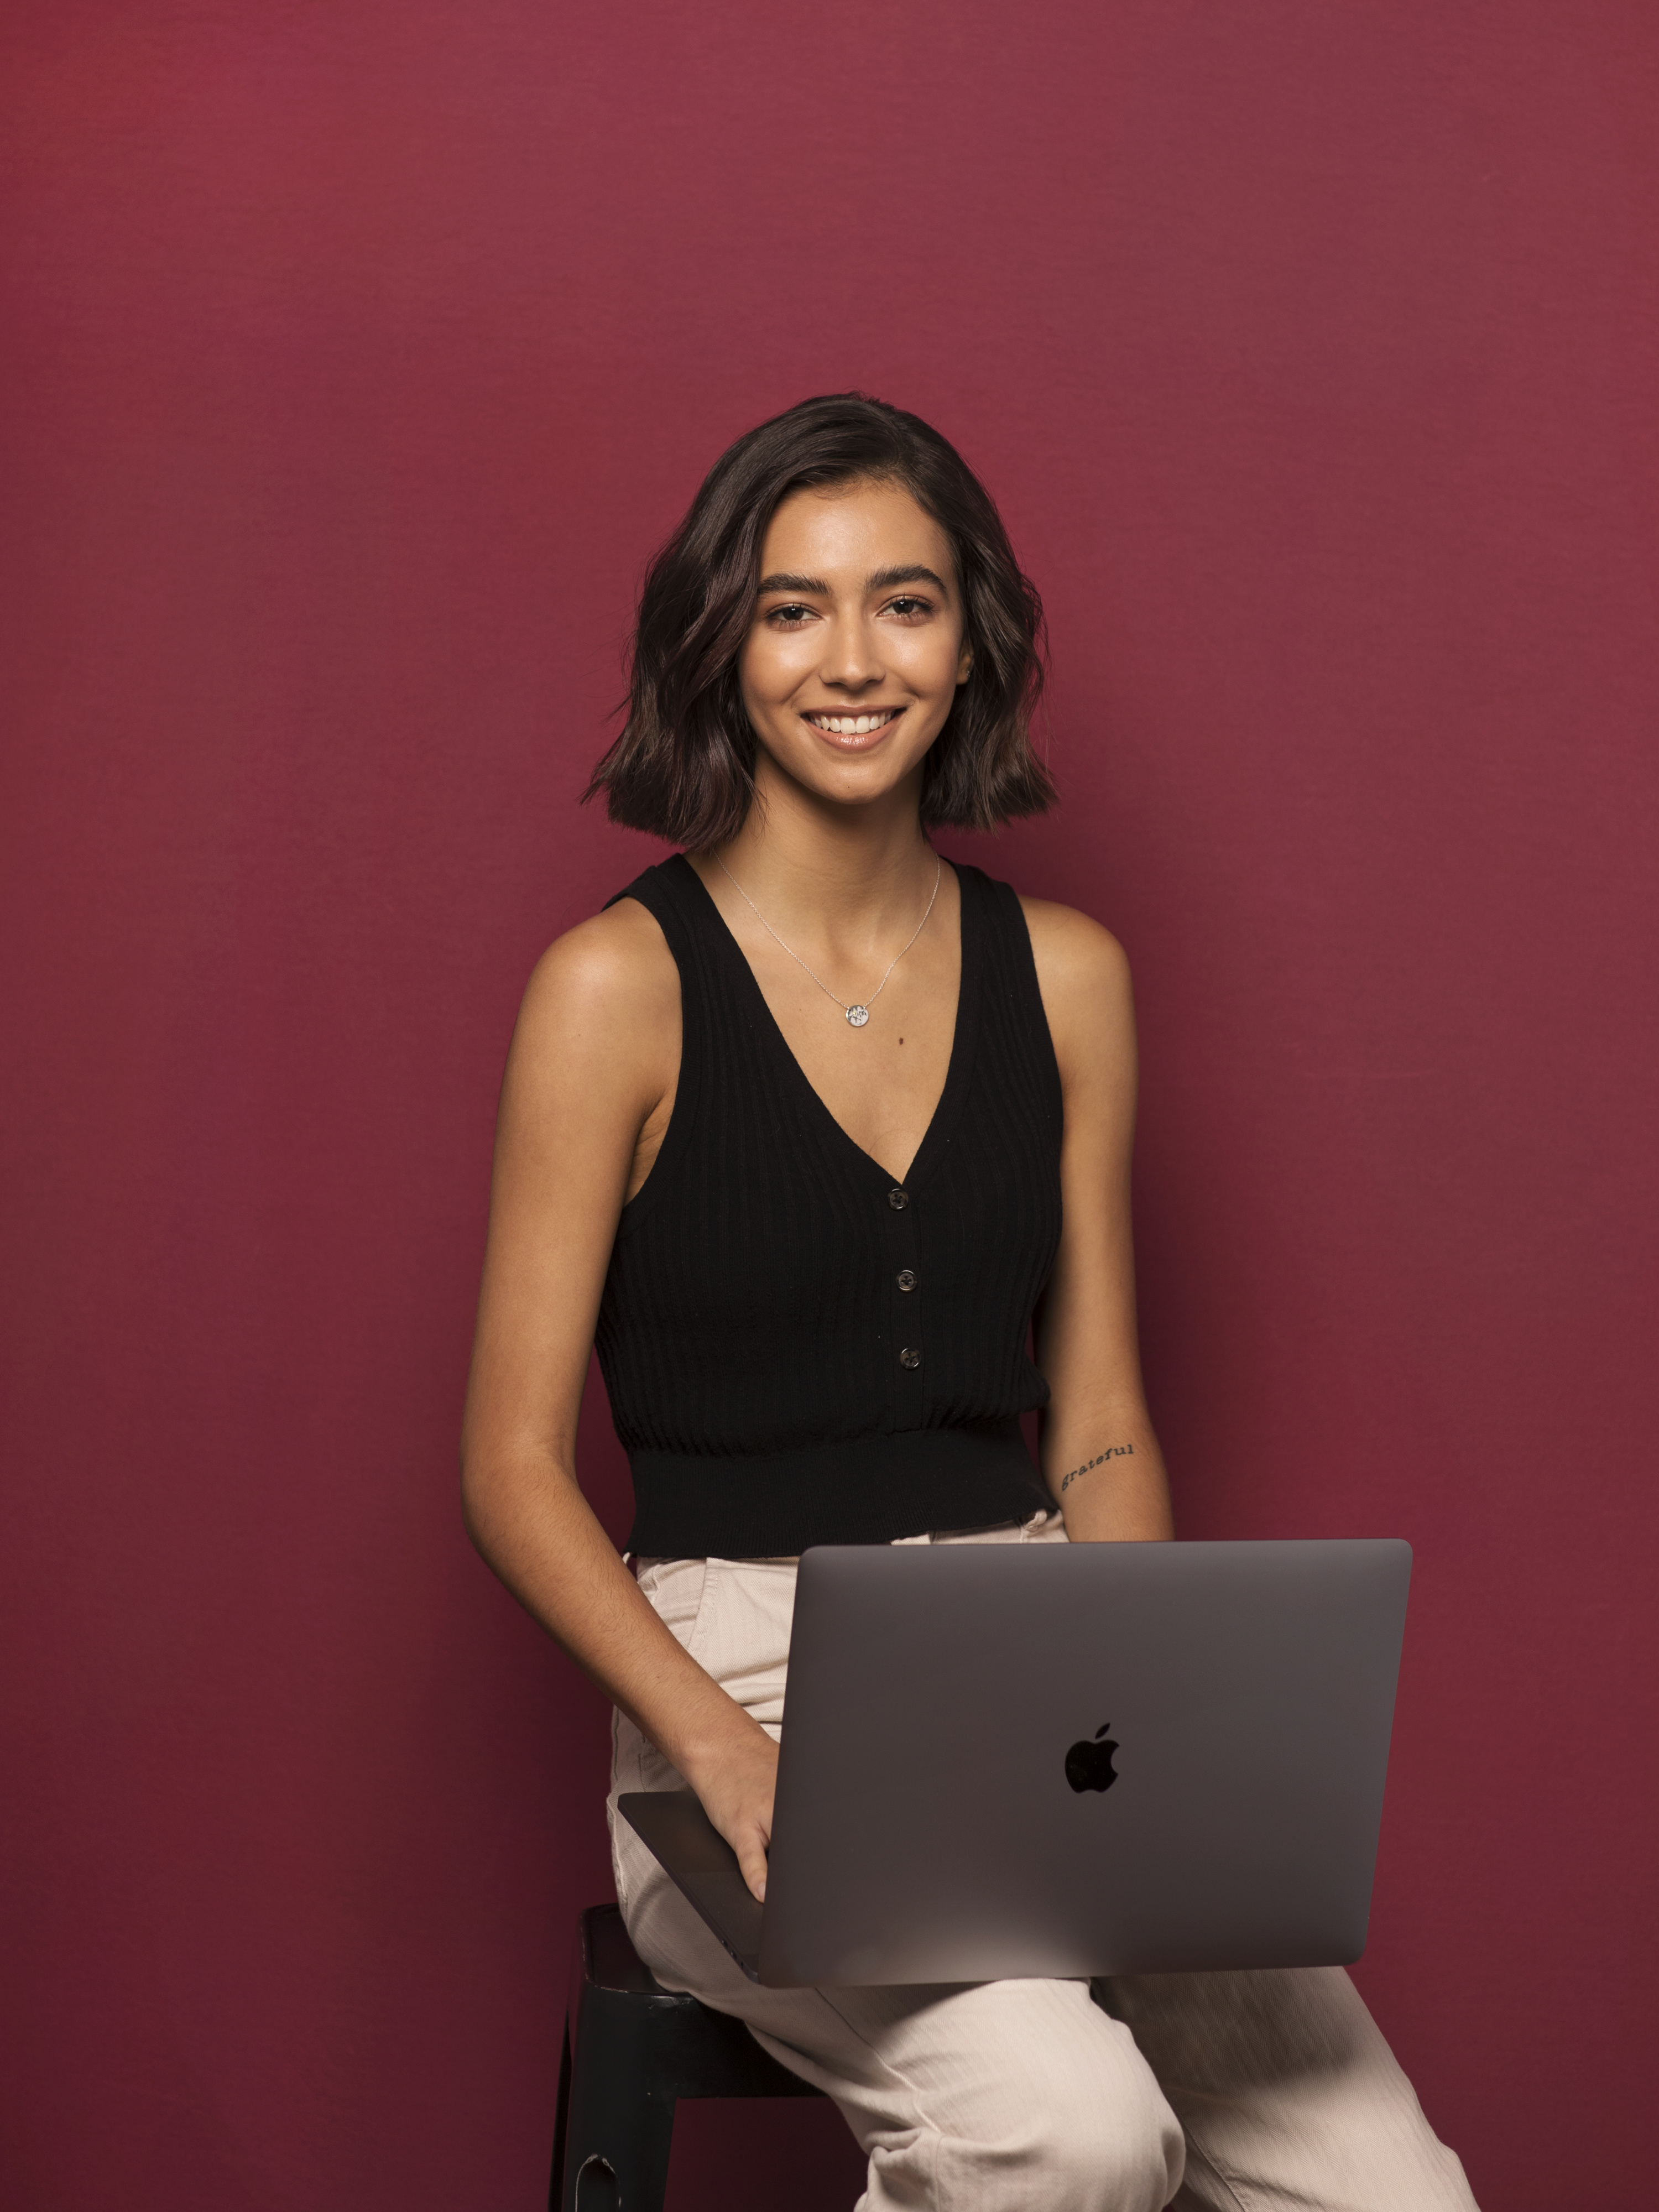 Student smiling with crimson background